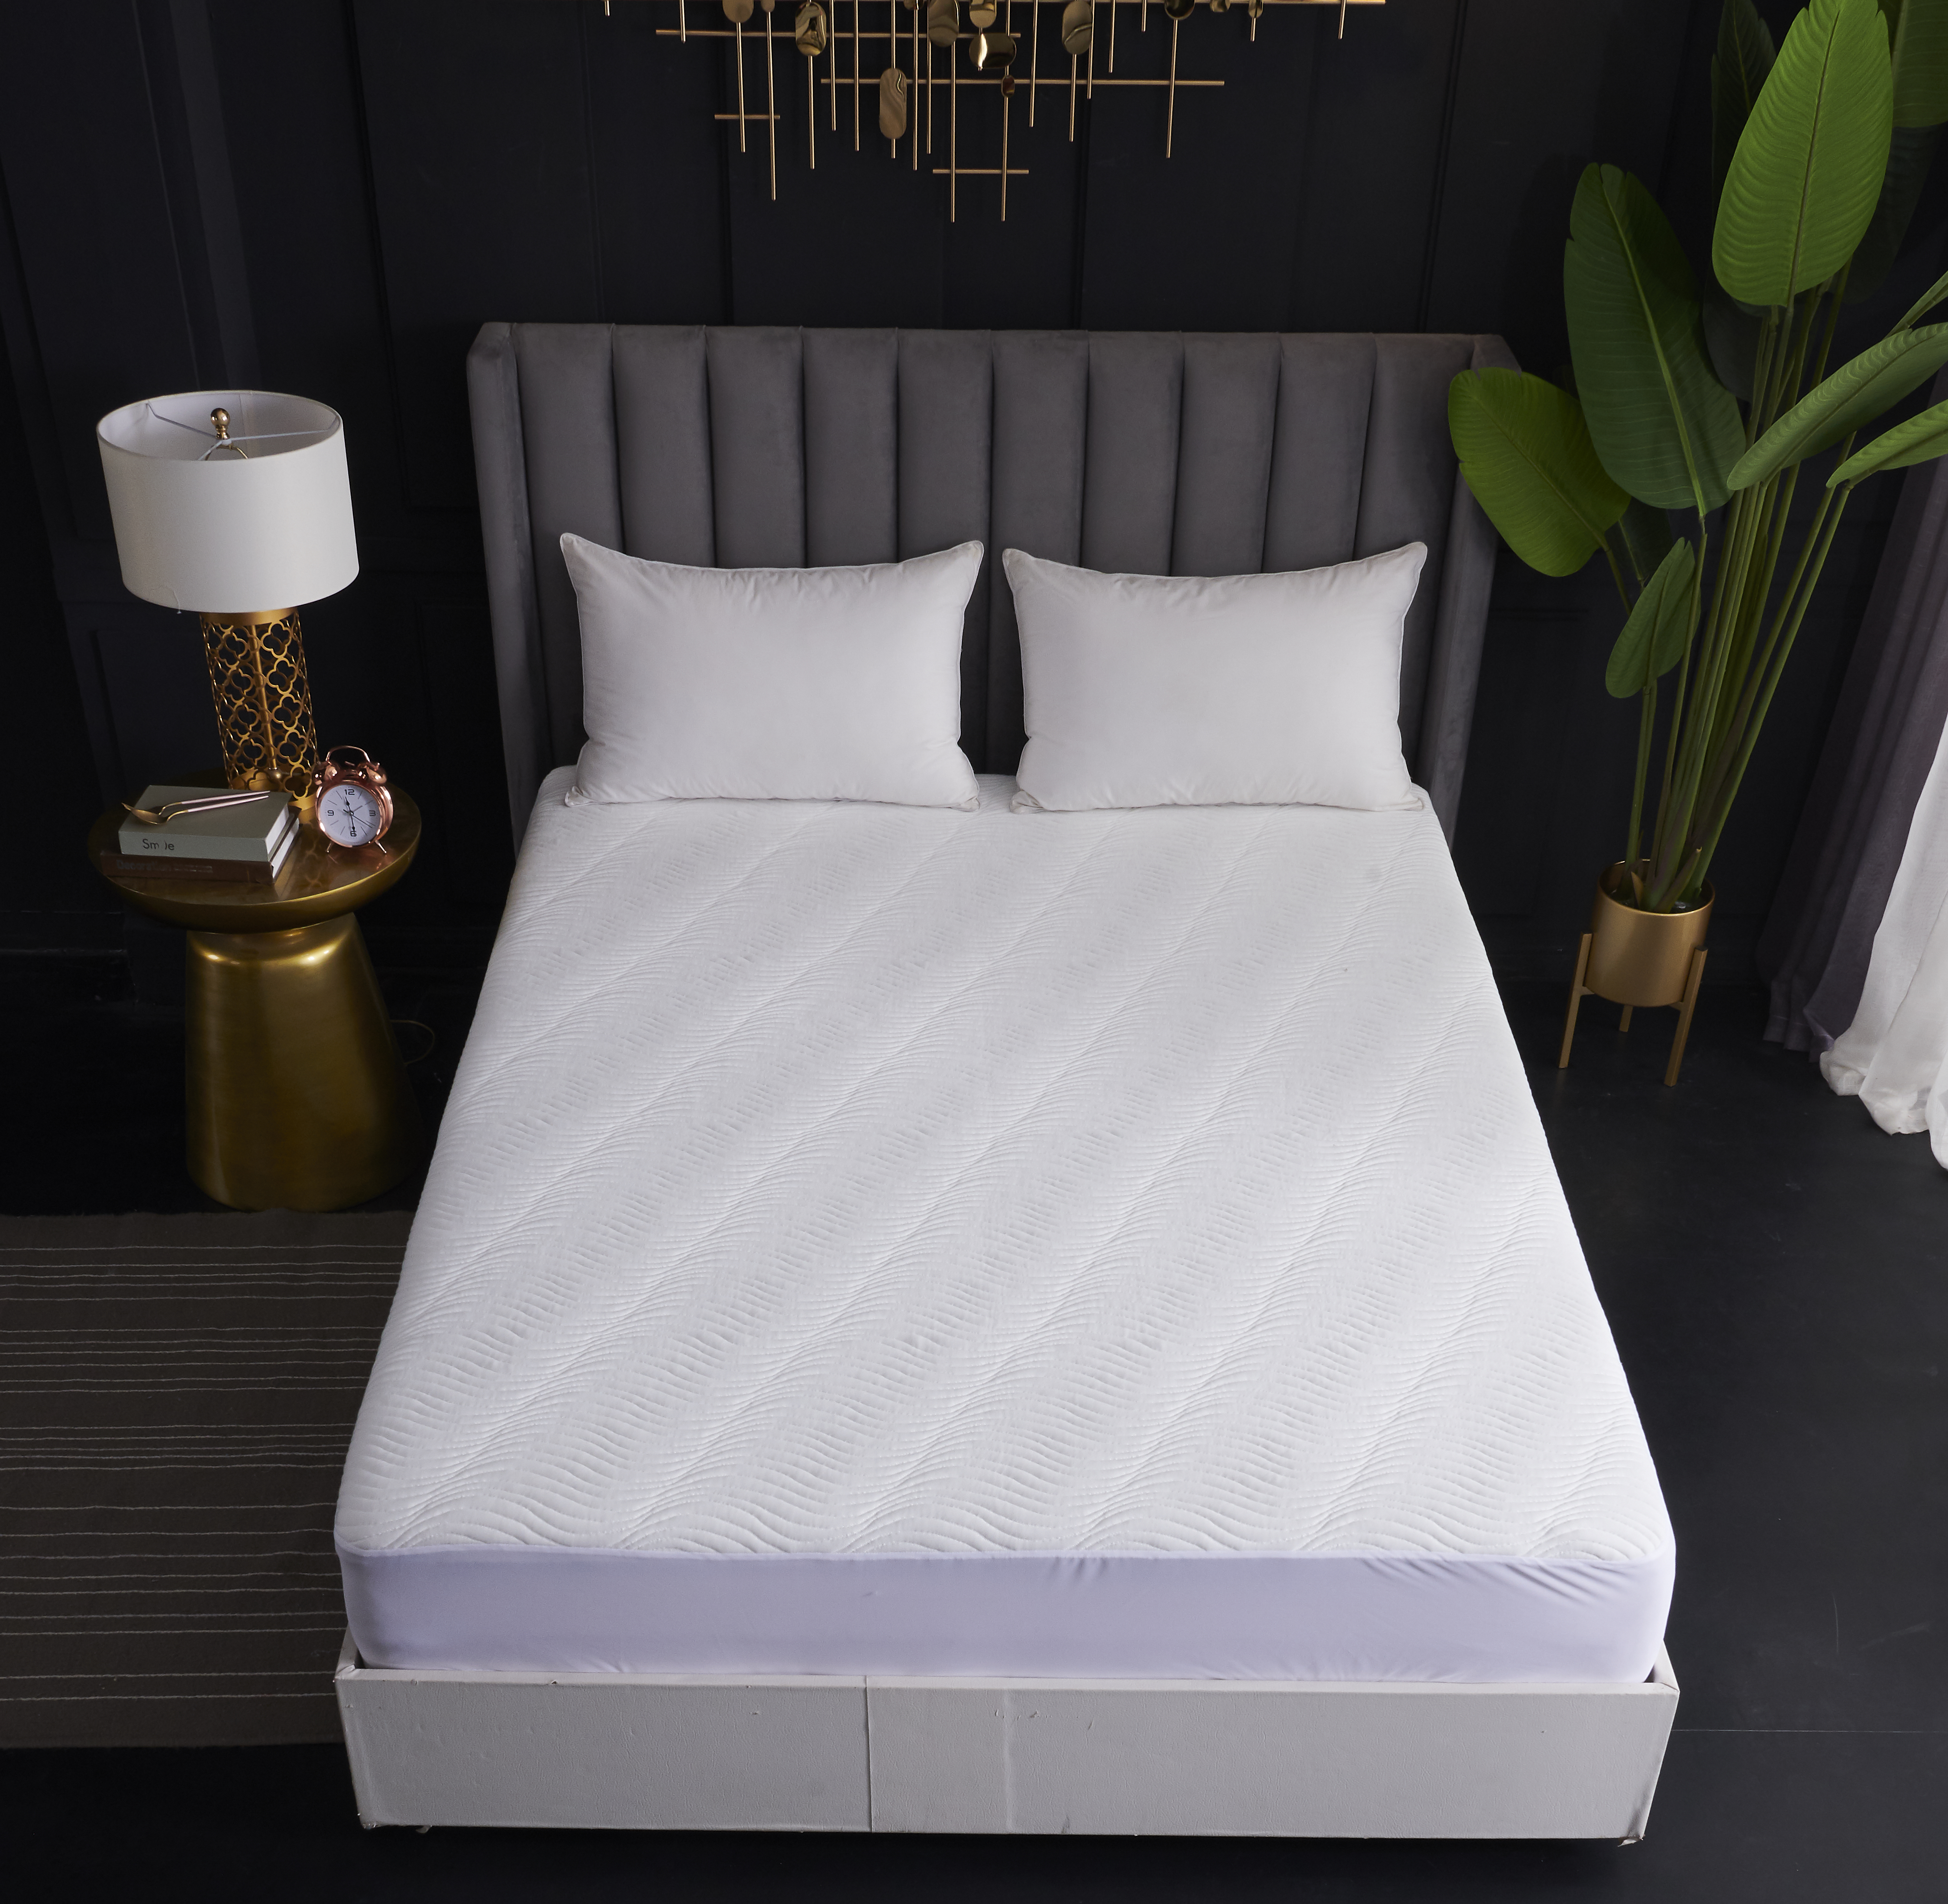 White Wavy Waterproof Breathable Air Layer Mattress Protector